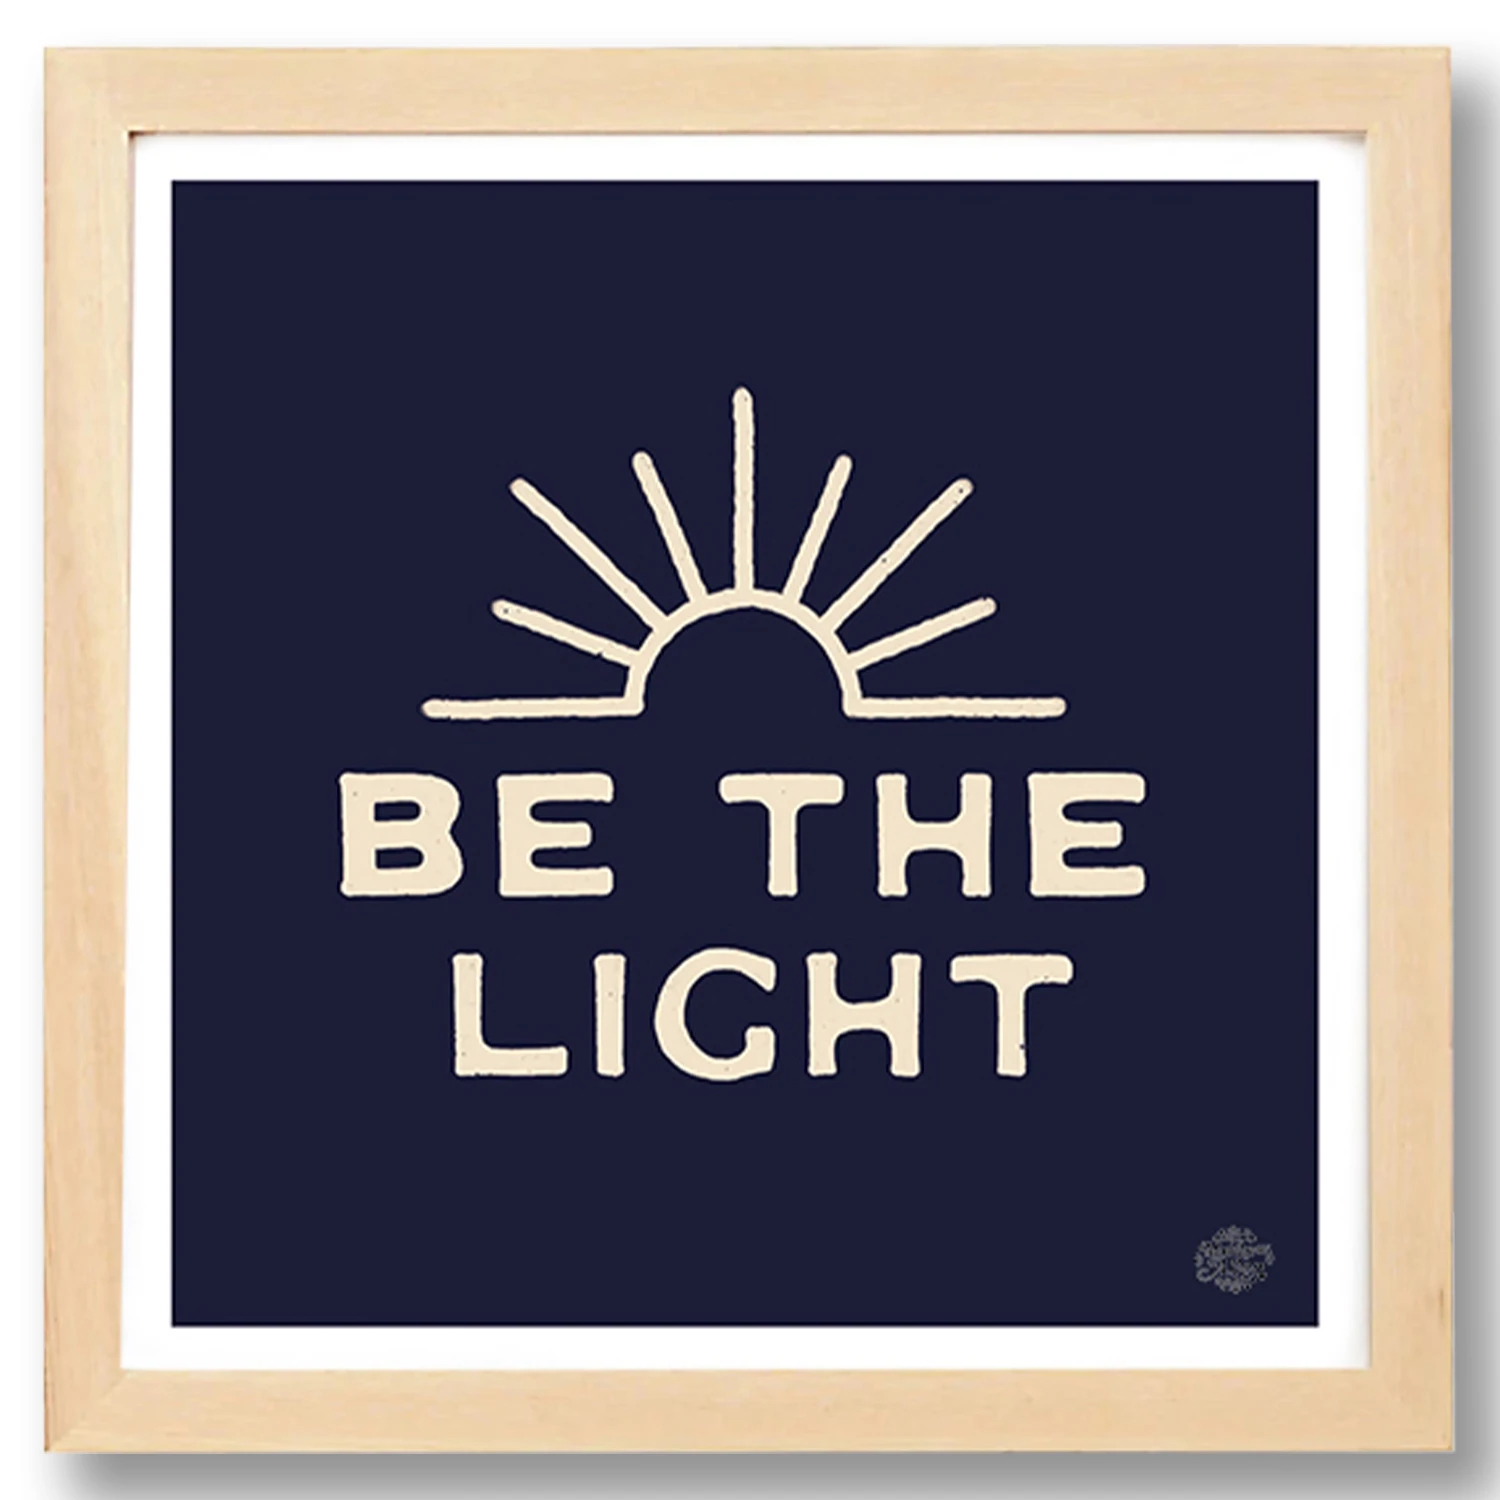 BE THE LIGHT